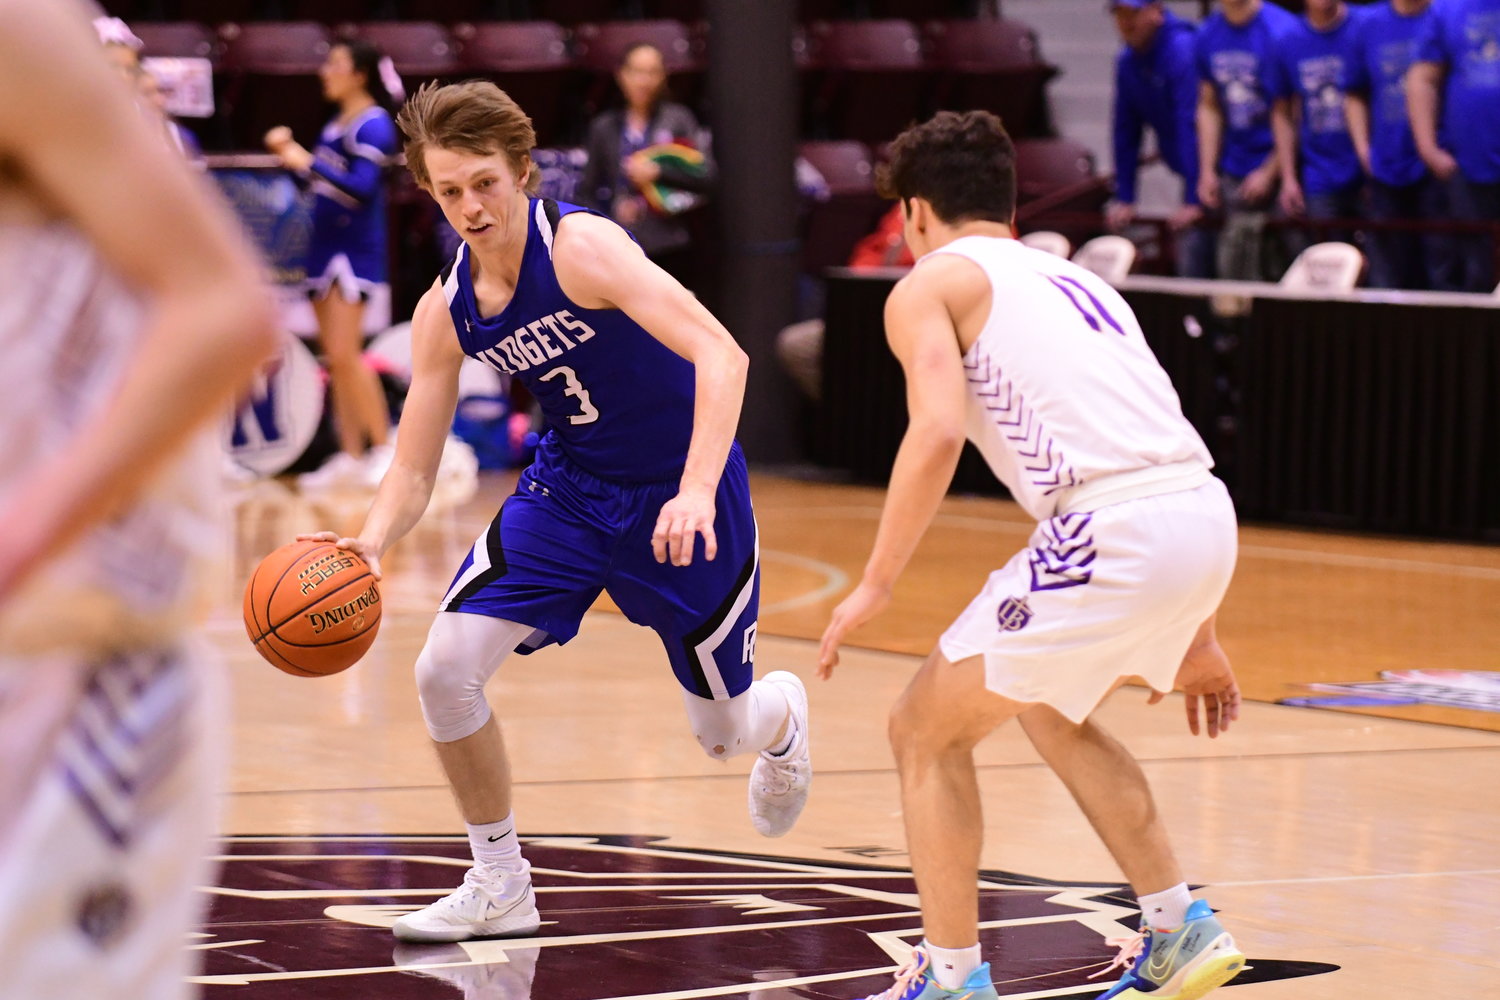 Photos from Putnam County’s Class 2 third-place game at the 2022 MSHSAA Show-Me Showdown, held on Saturday, March 12 at the Hammons Student Center in Springfield.